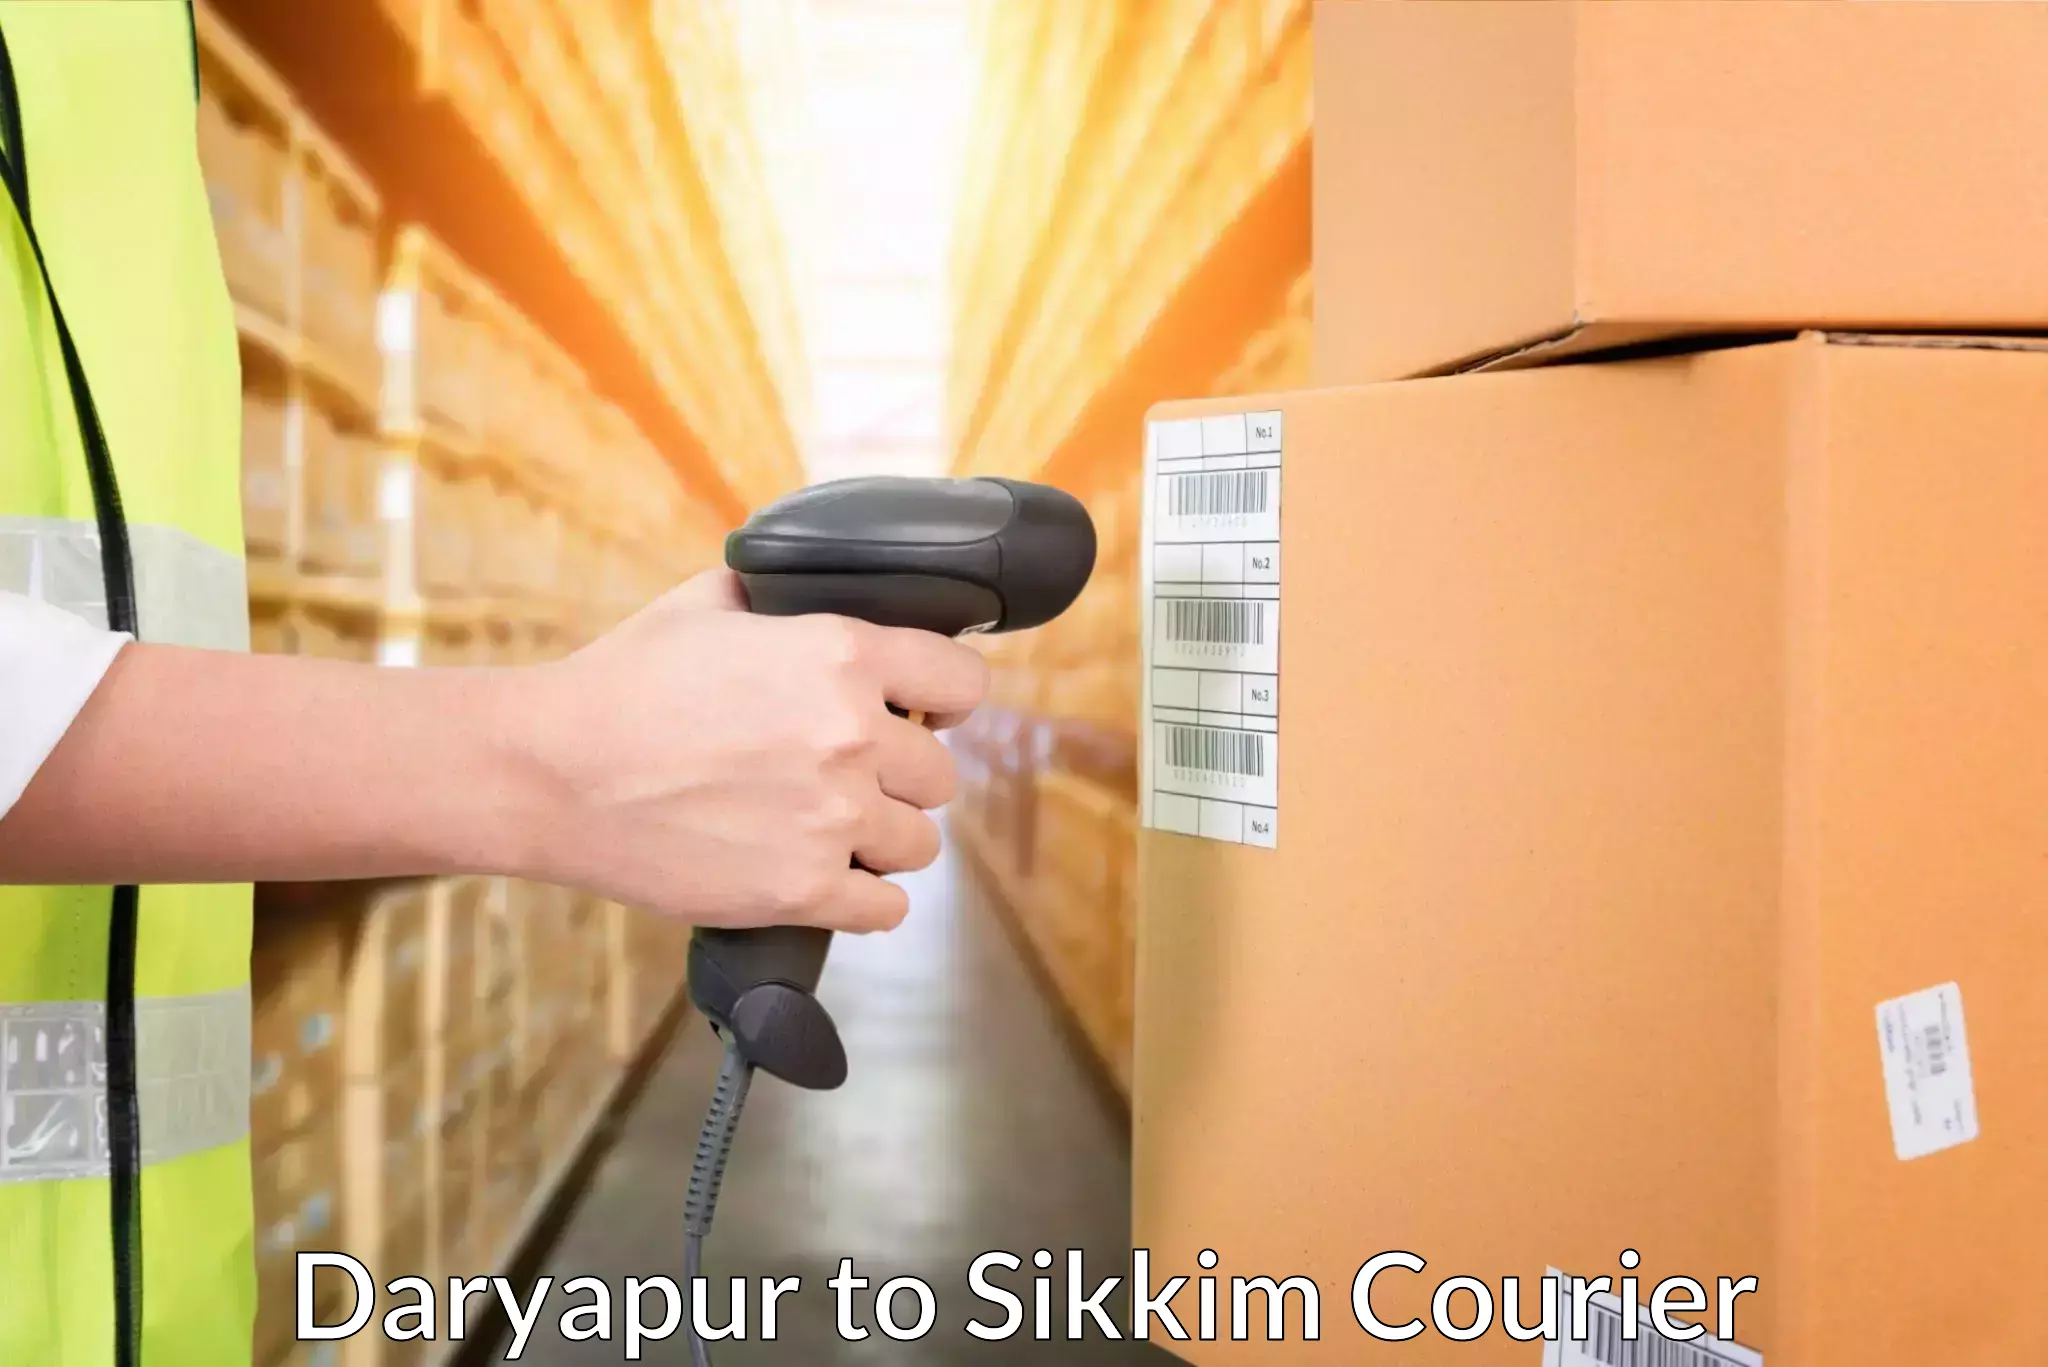 Global shipping solutions Daryapur to Pelling